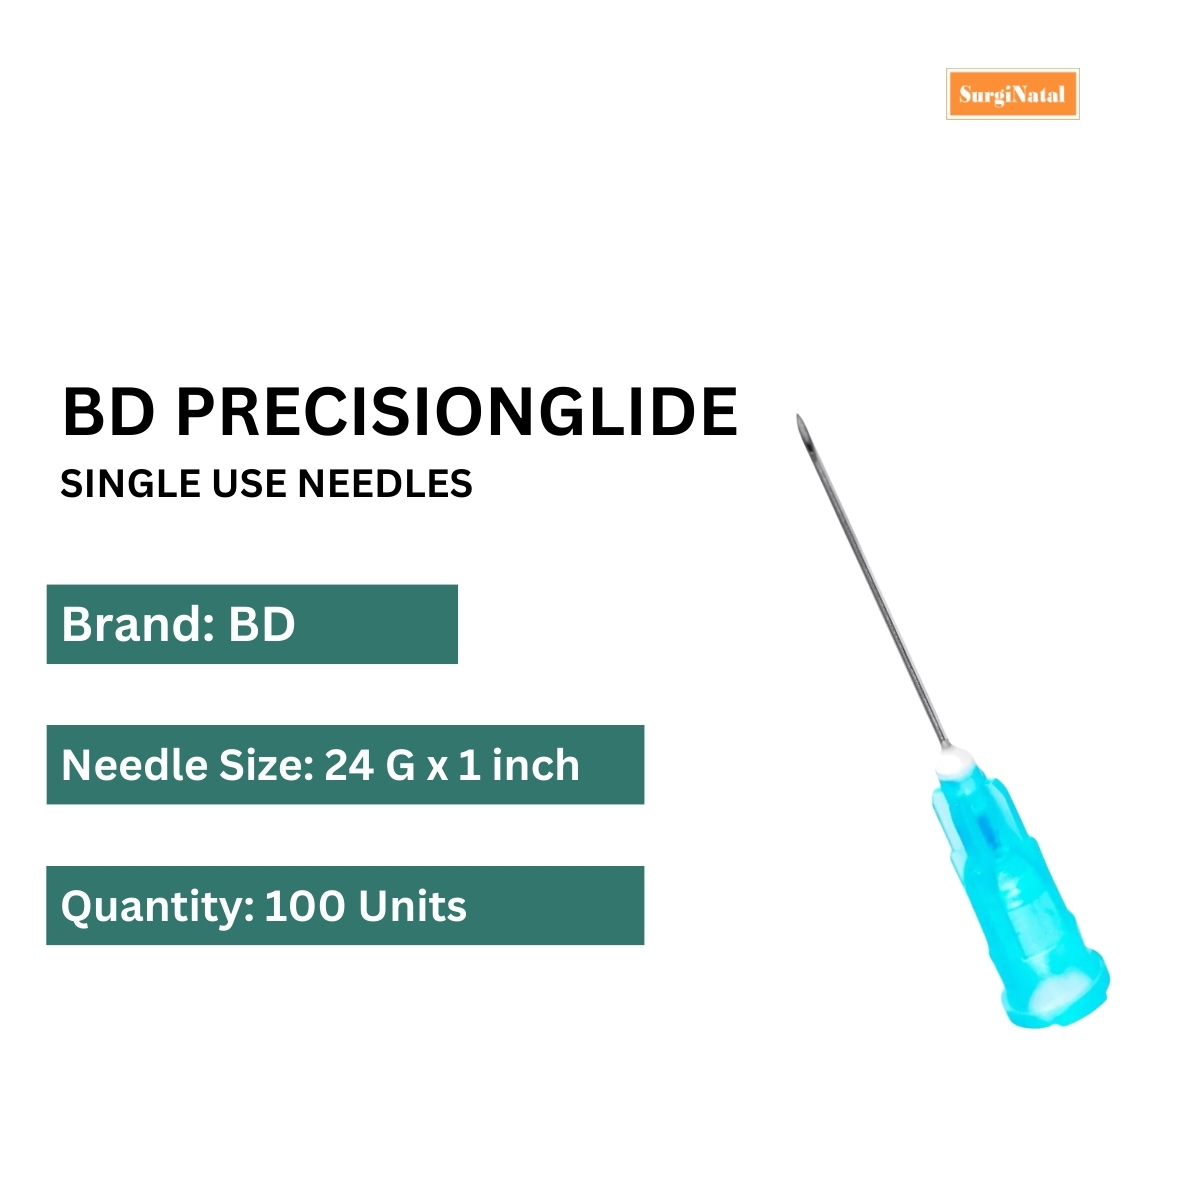 bd needles precisionglide 24g*1 inch - 100 units pack